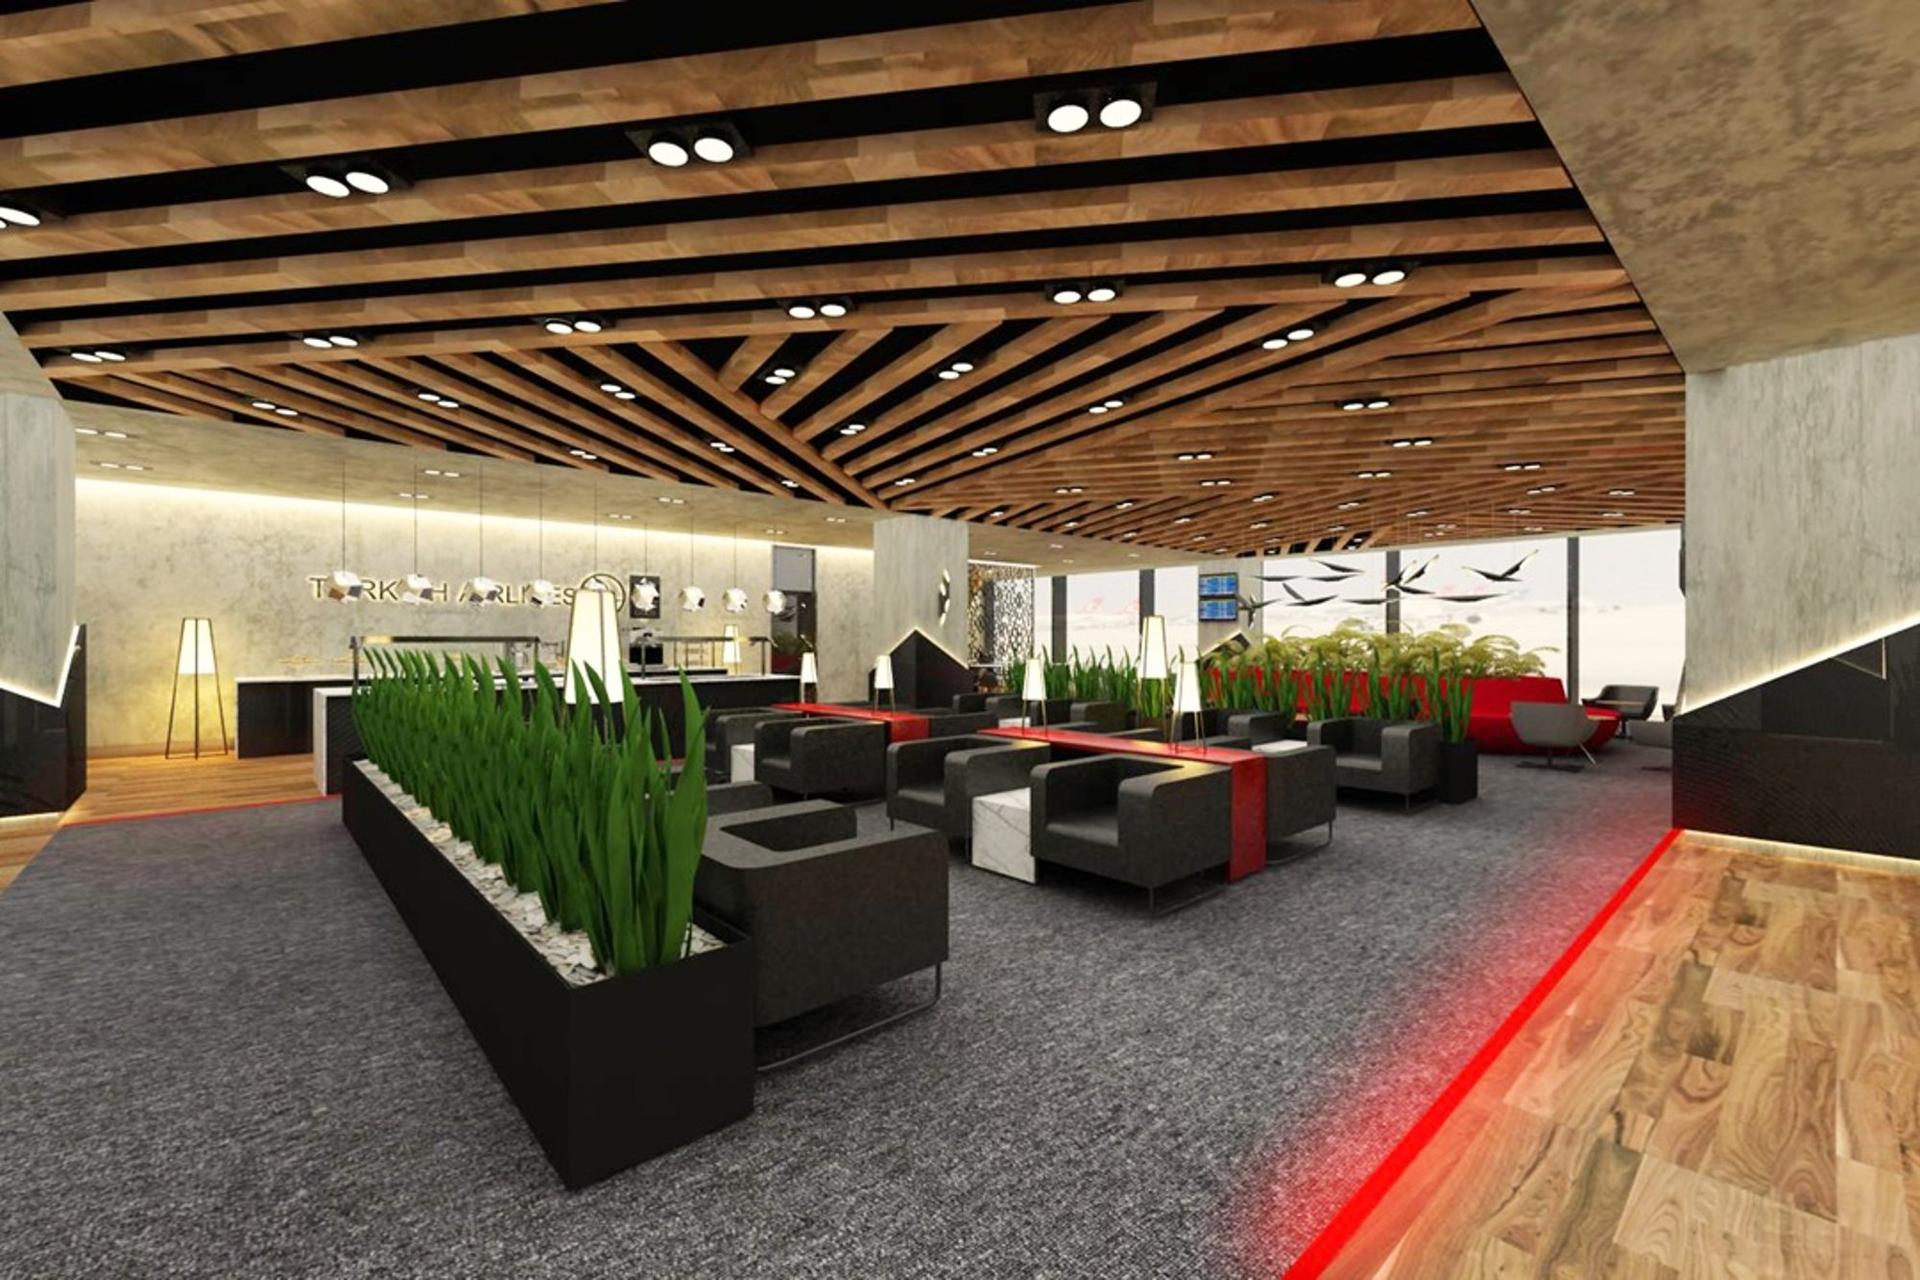 Turkish Airlines CIP Lounge (Business Lounge) image 23 of 27